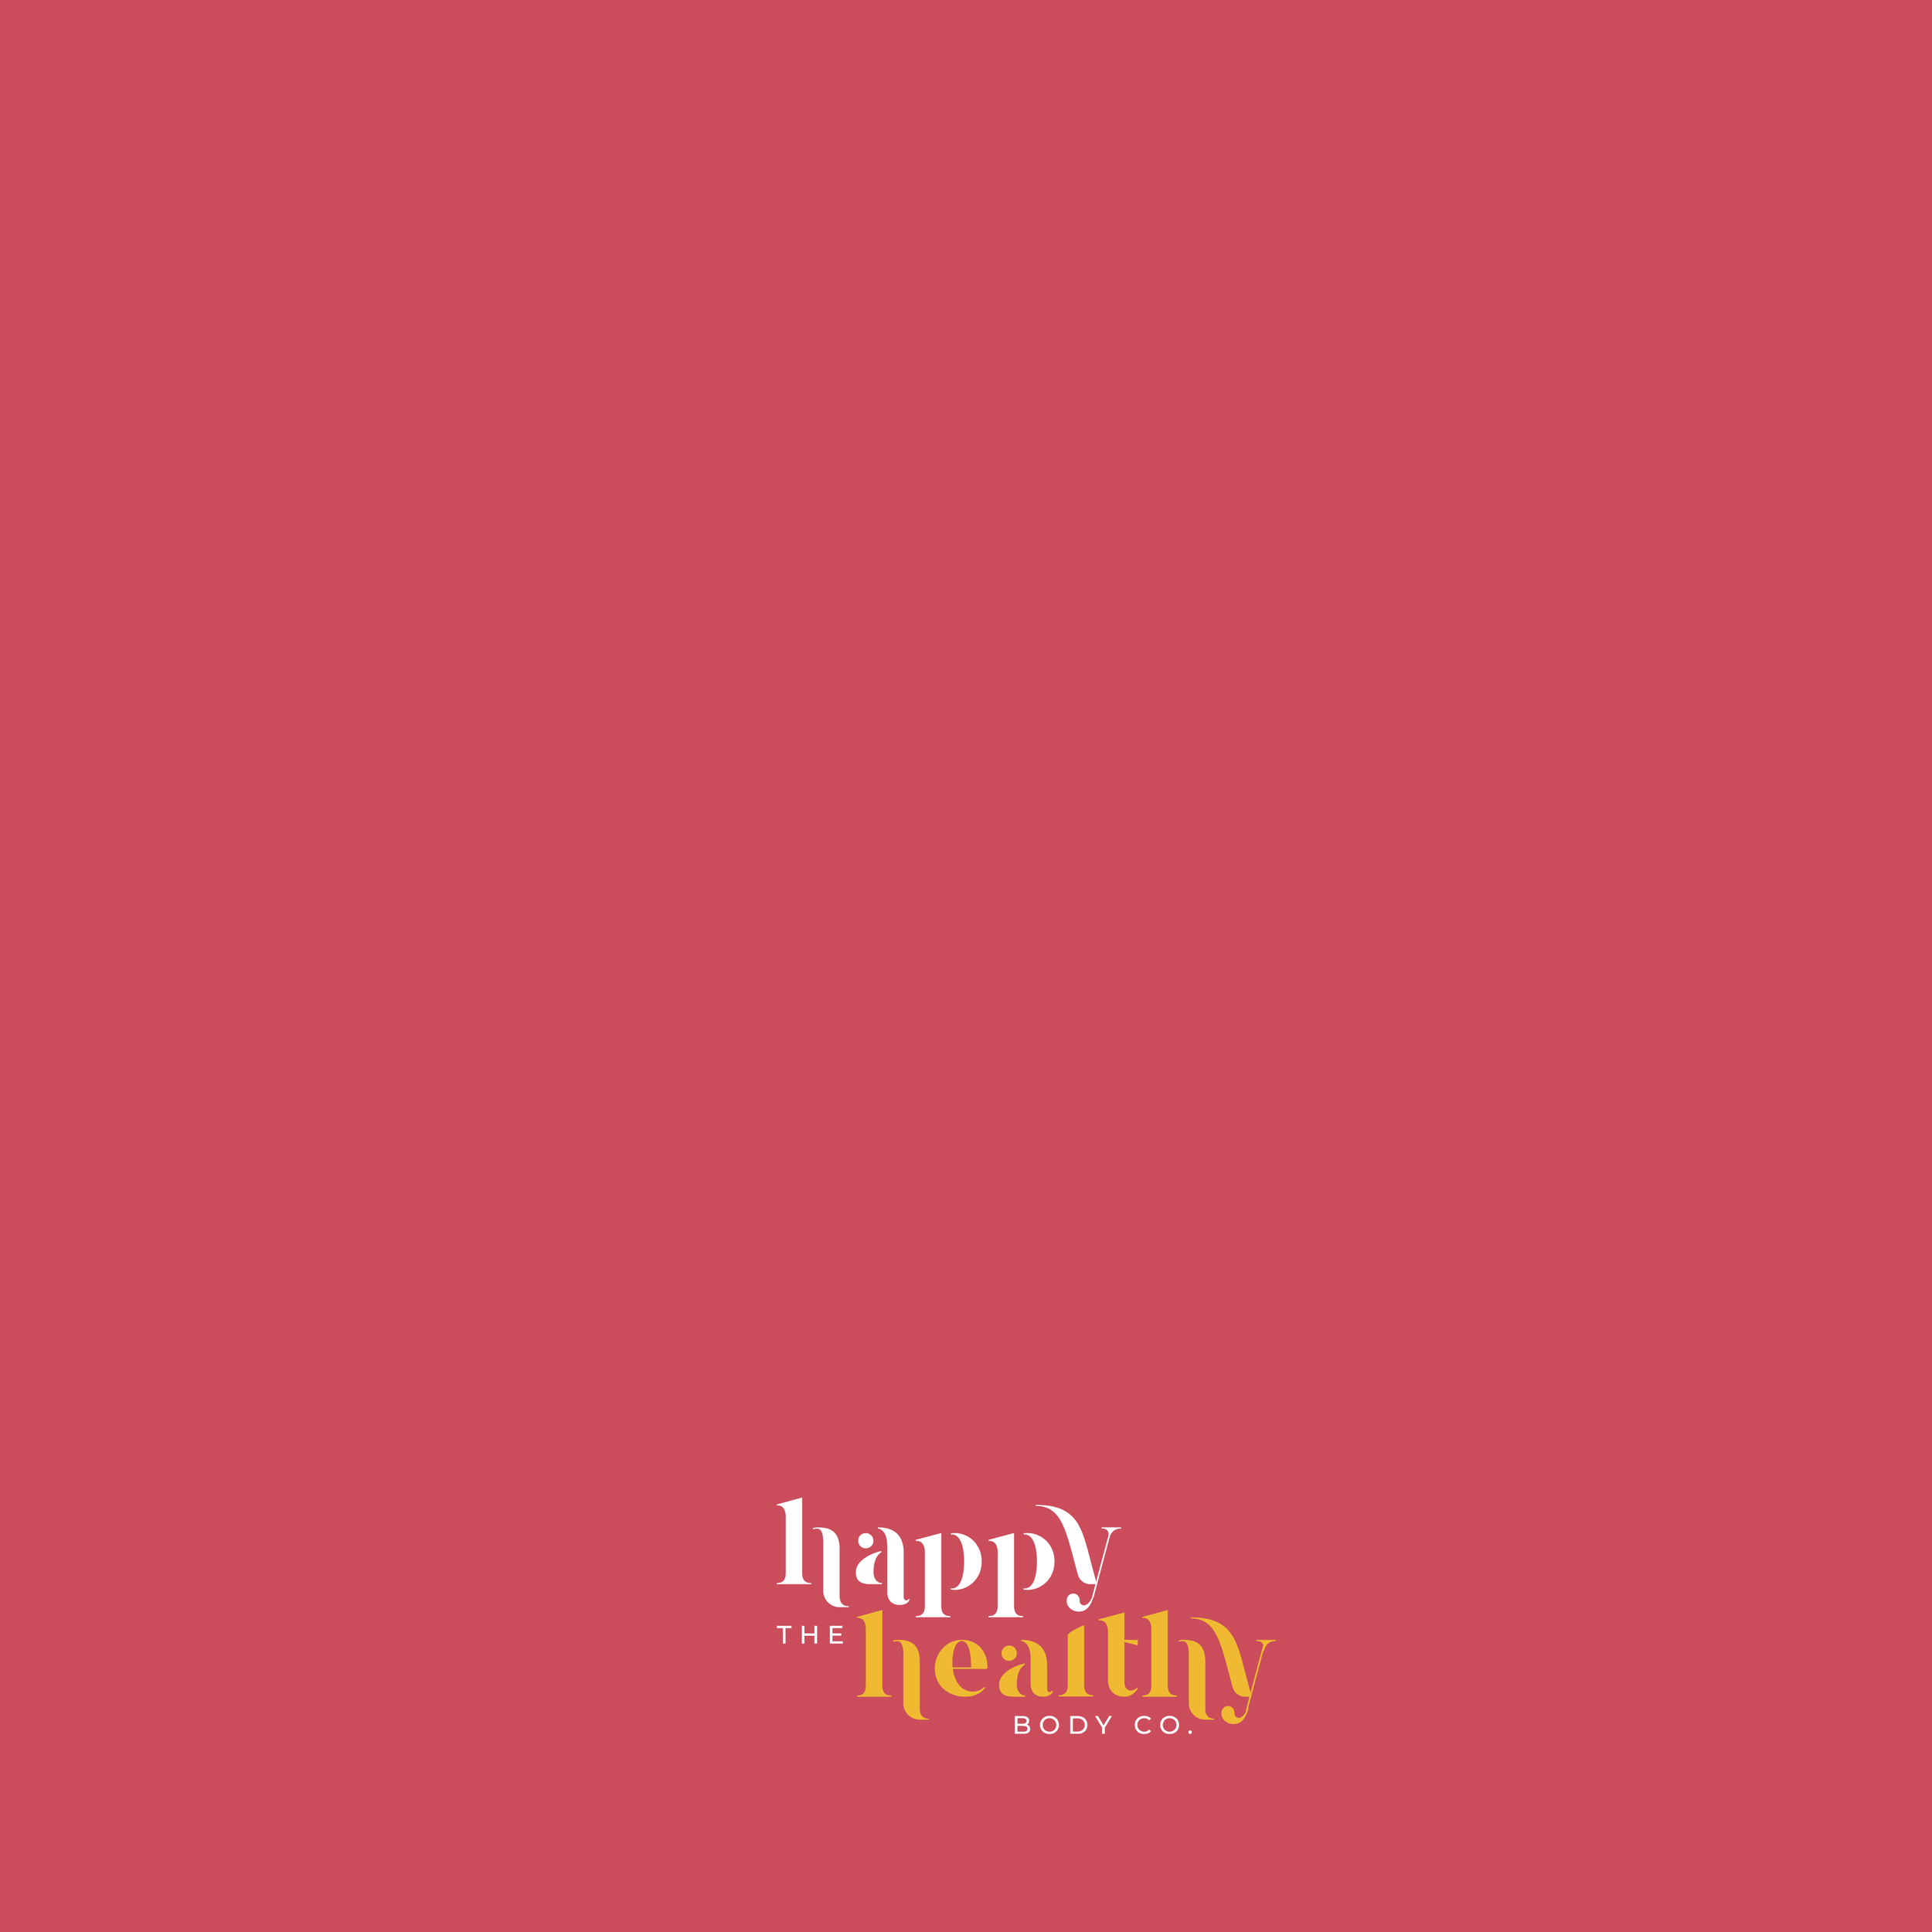 healthy-happy-body-sm-square-3.png